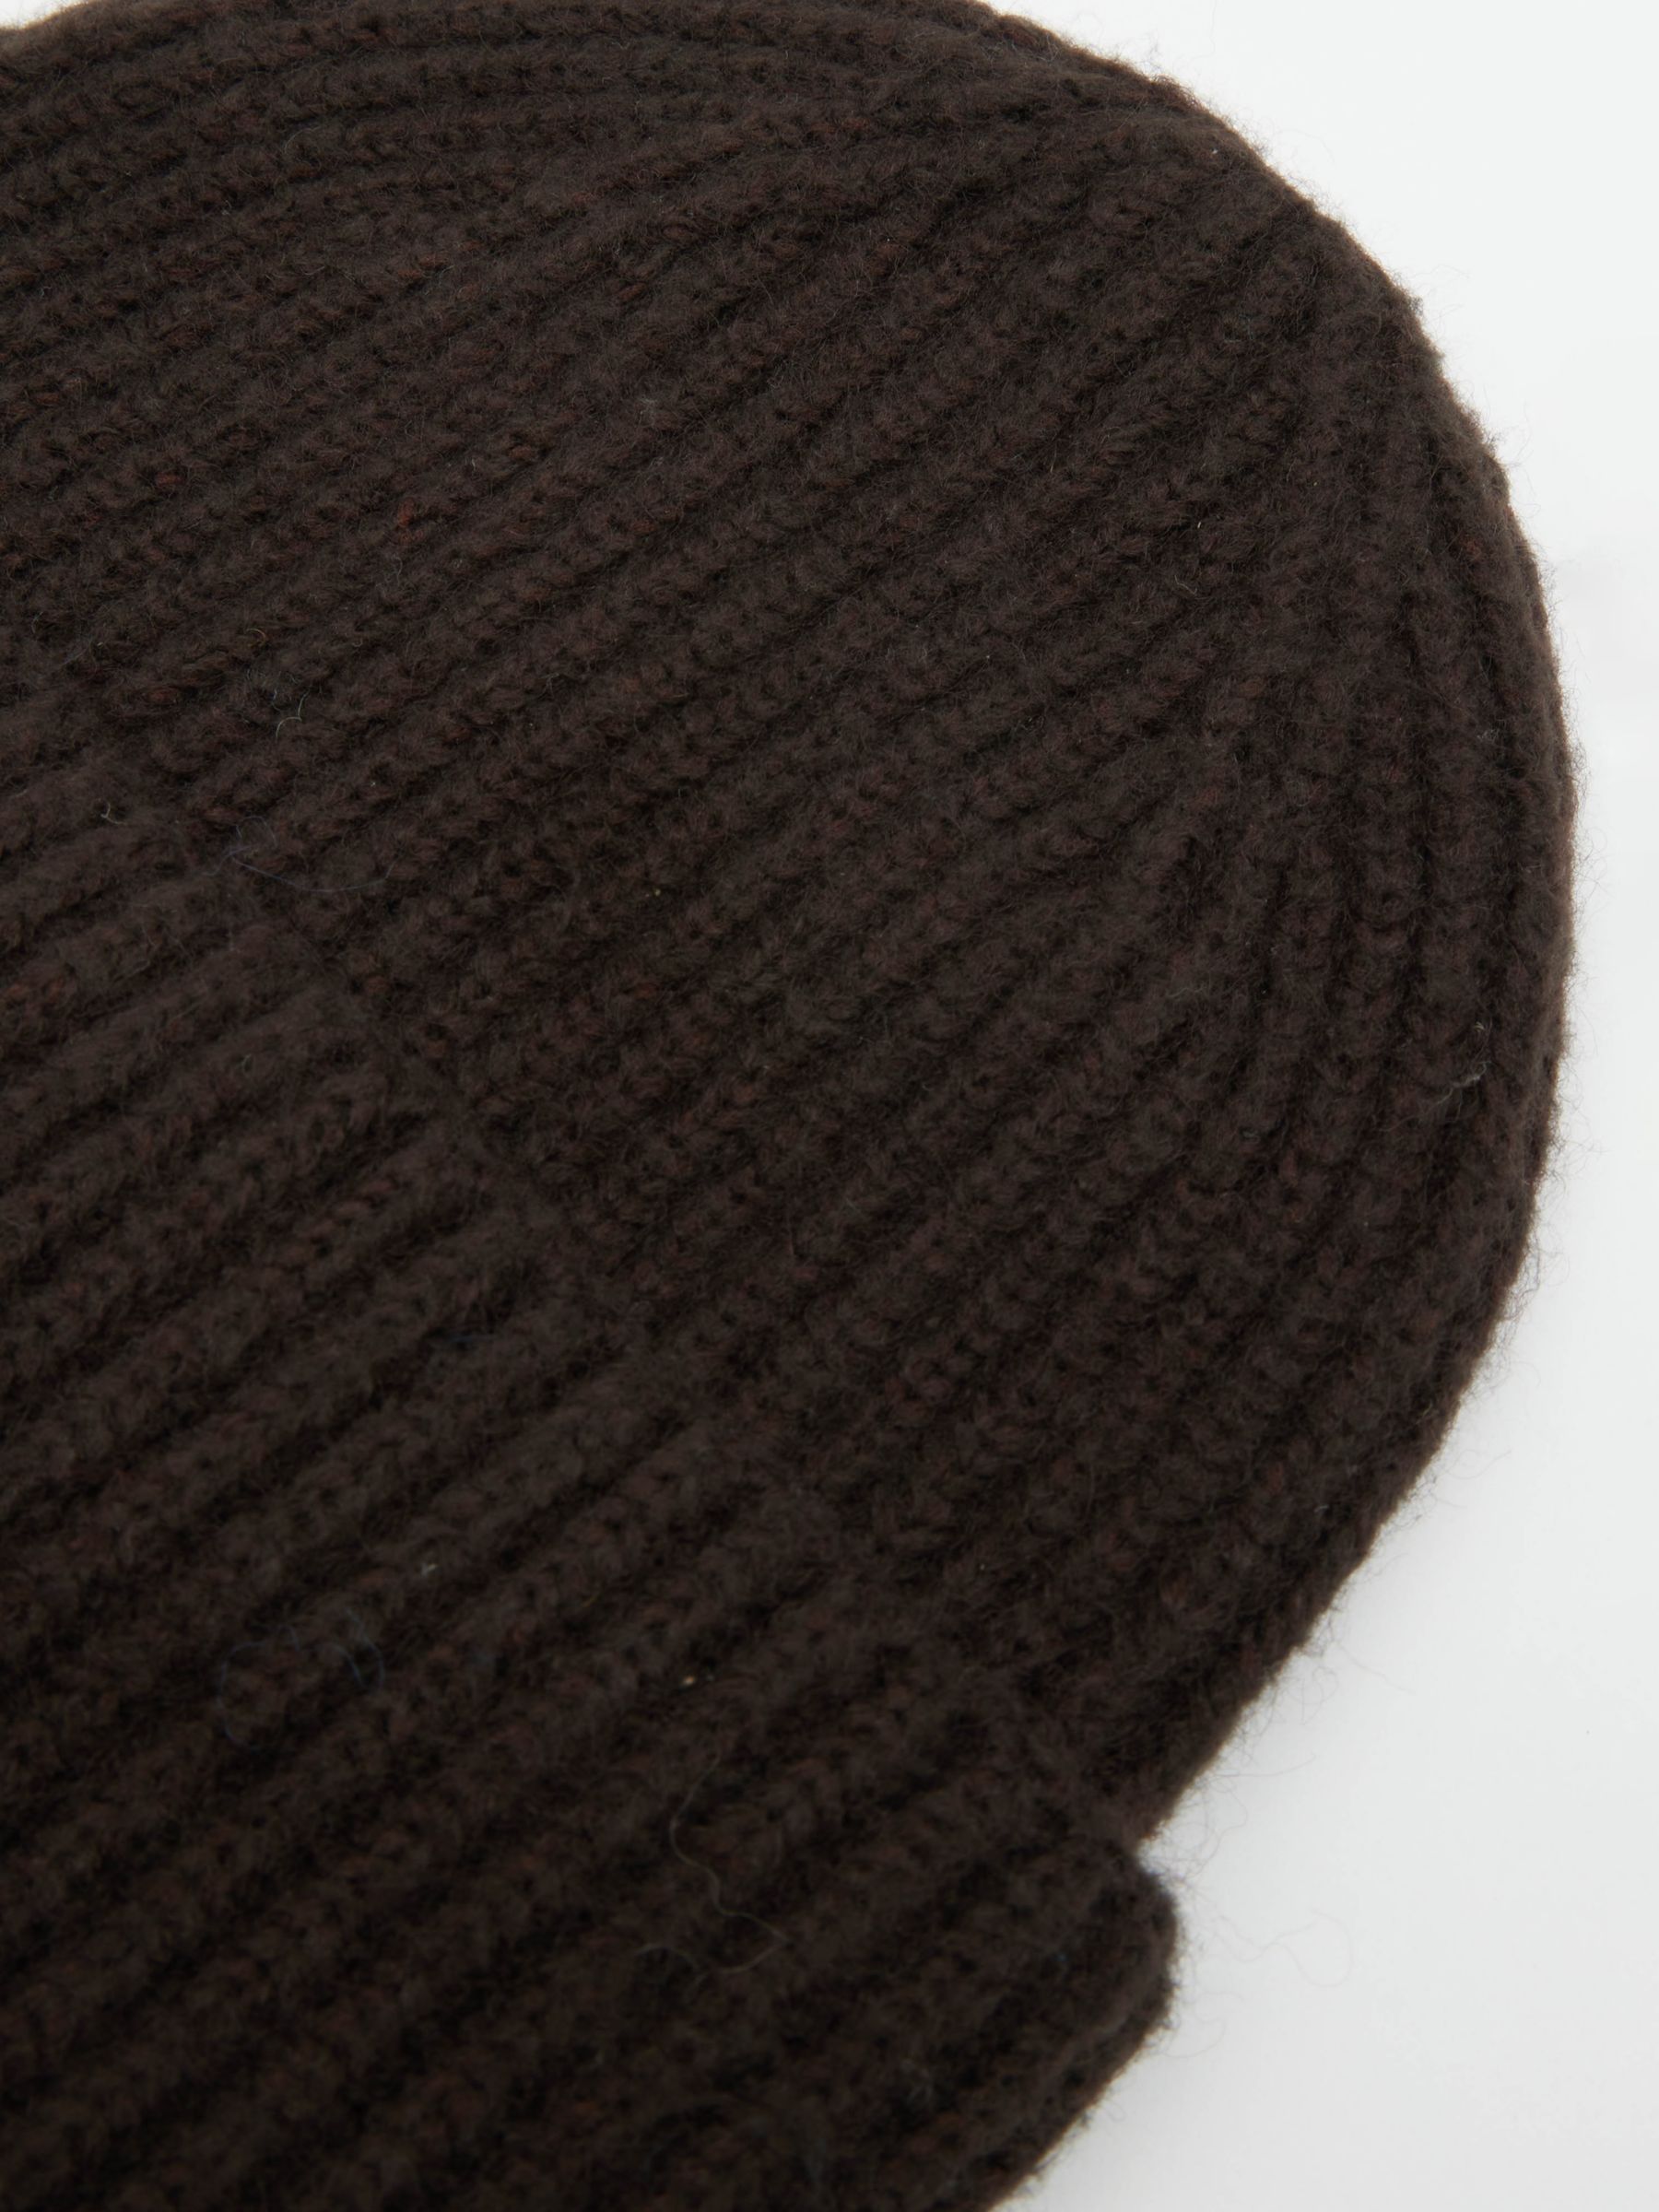 HUSH Denver Supersoft Beanie, Chocolate Brown, One Size